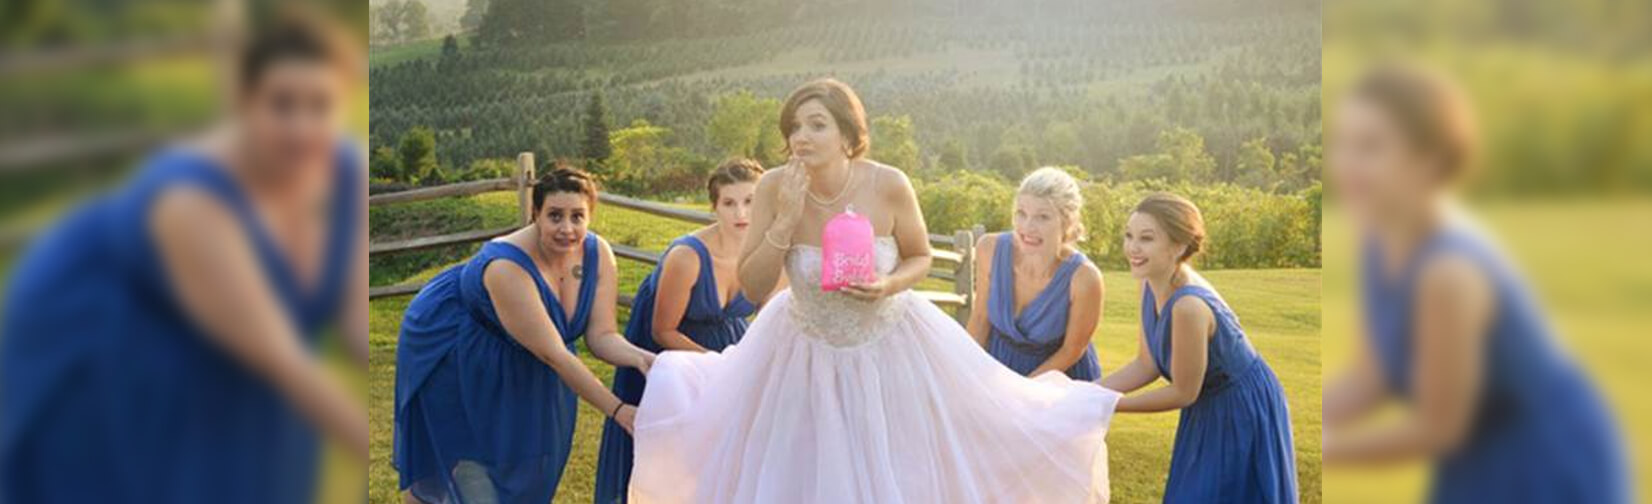 Bridal Buddy allows brides to bag up their dresses so they can use the bathroom